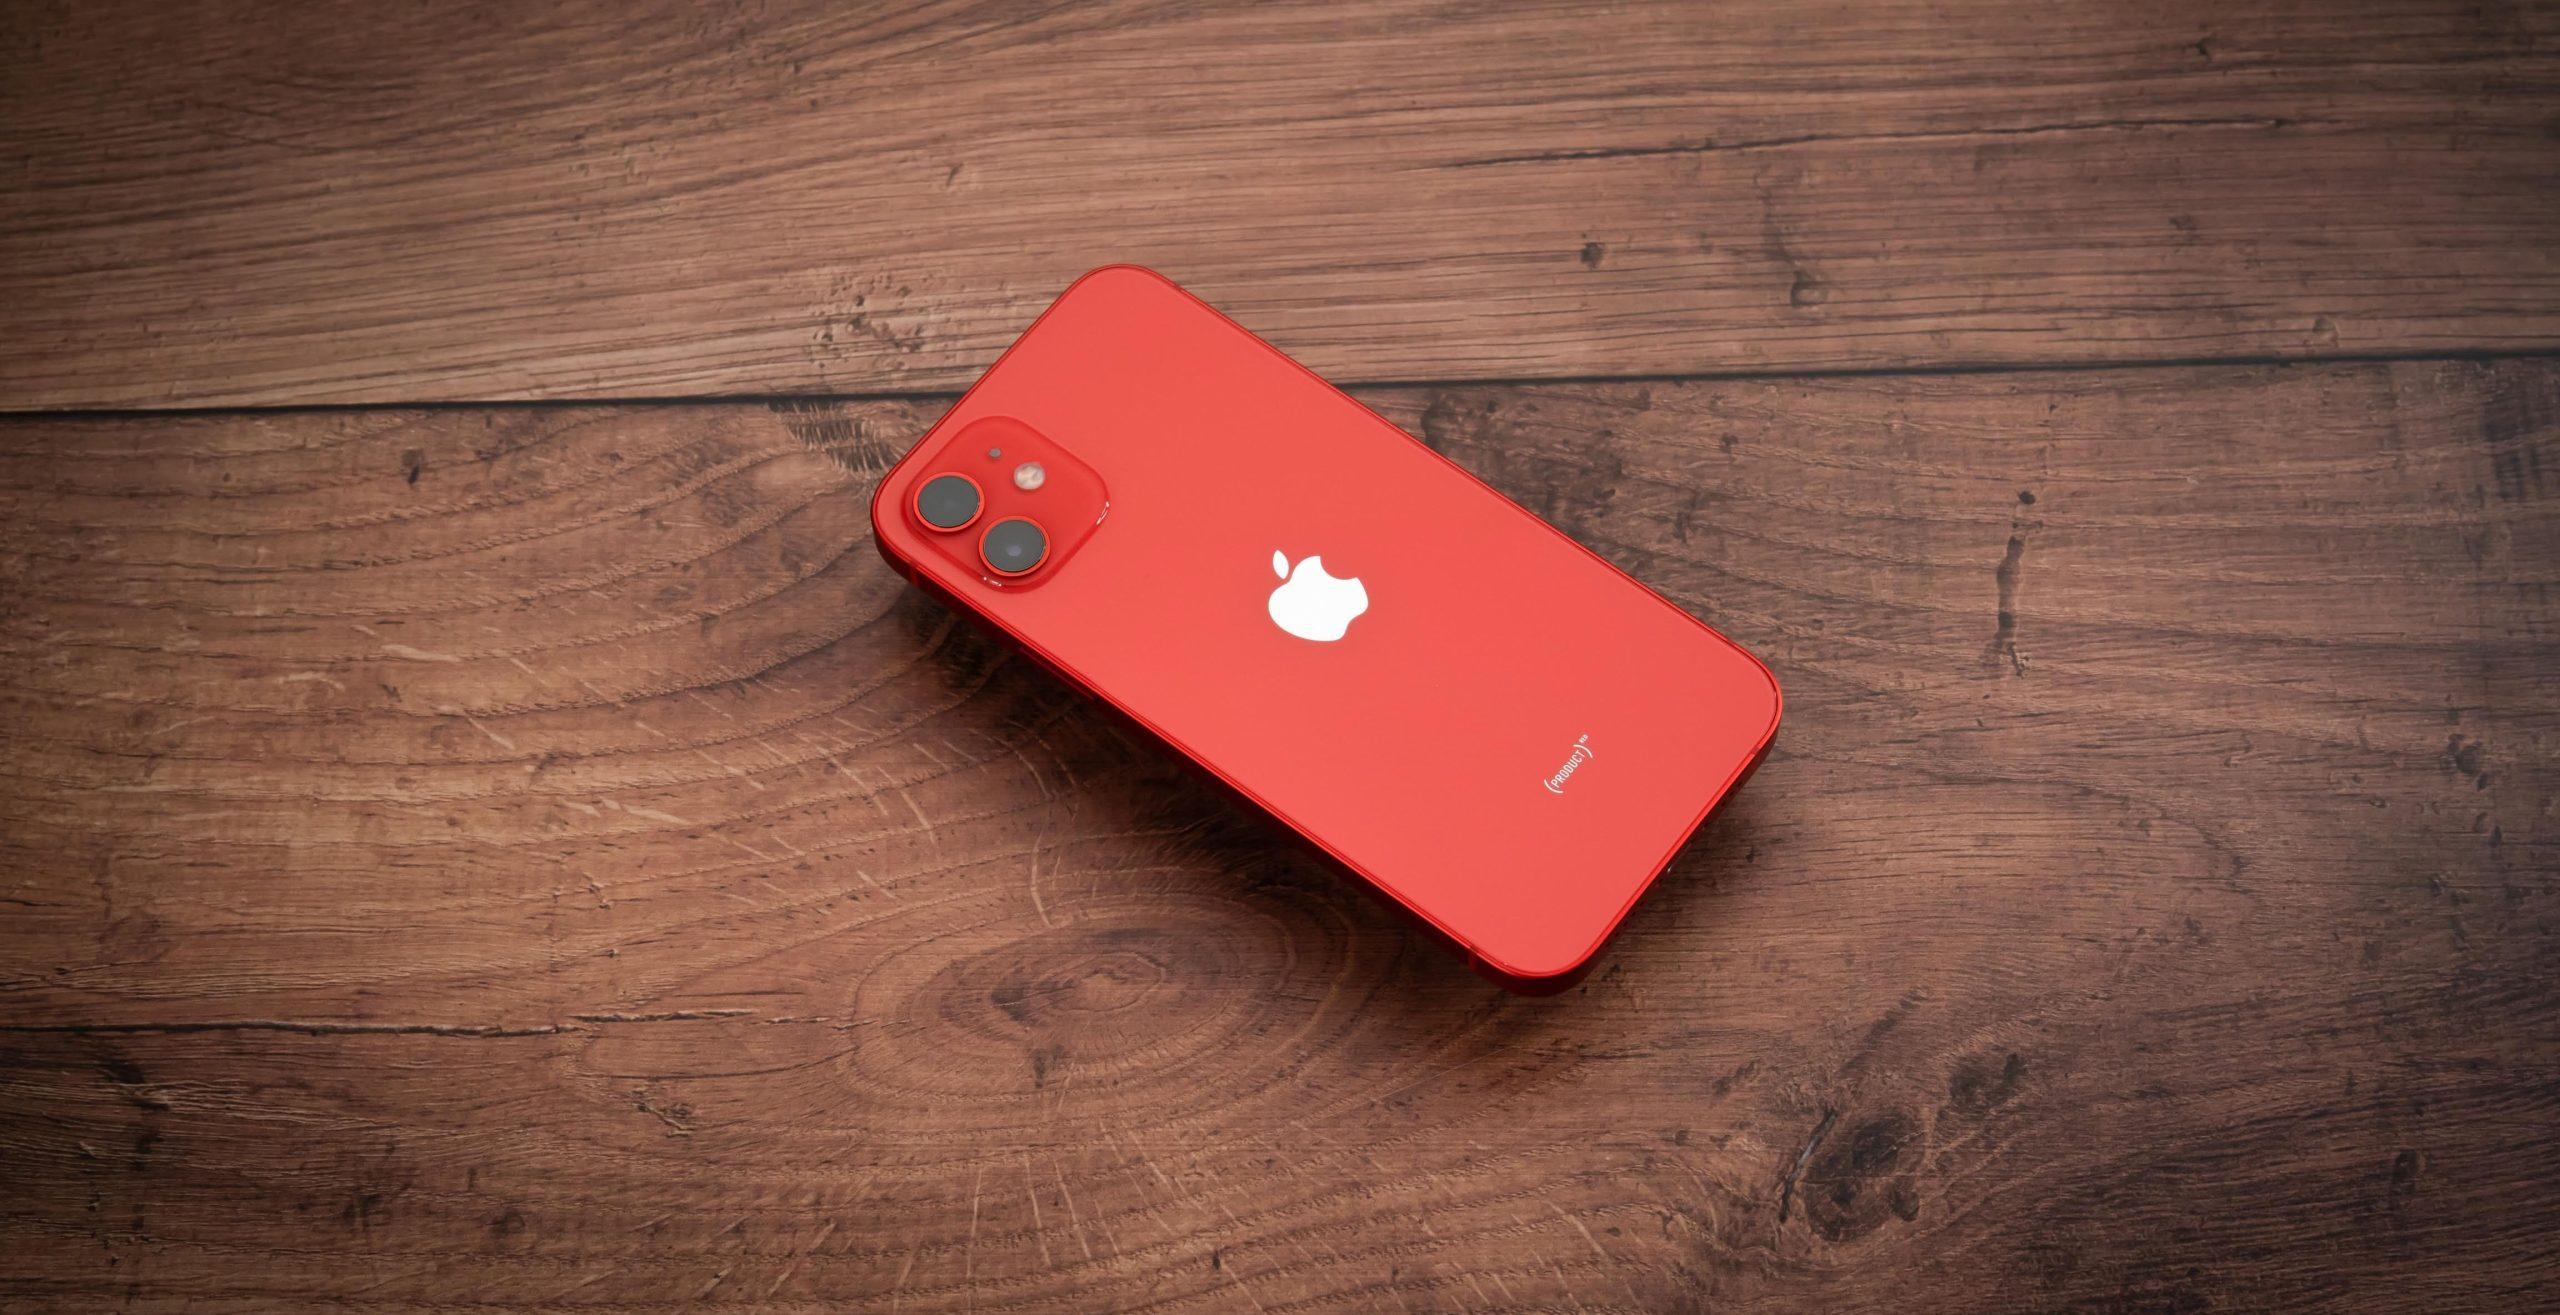 Red Apple iPhone placed on a wooden surface.